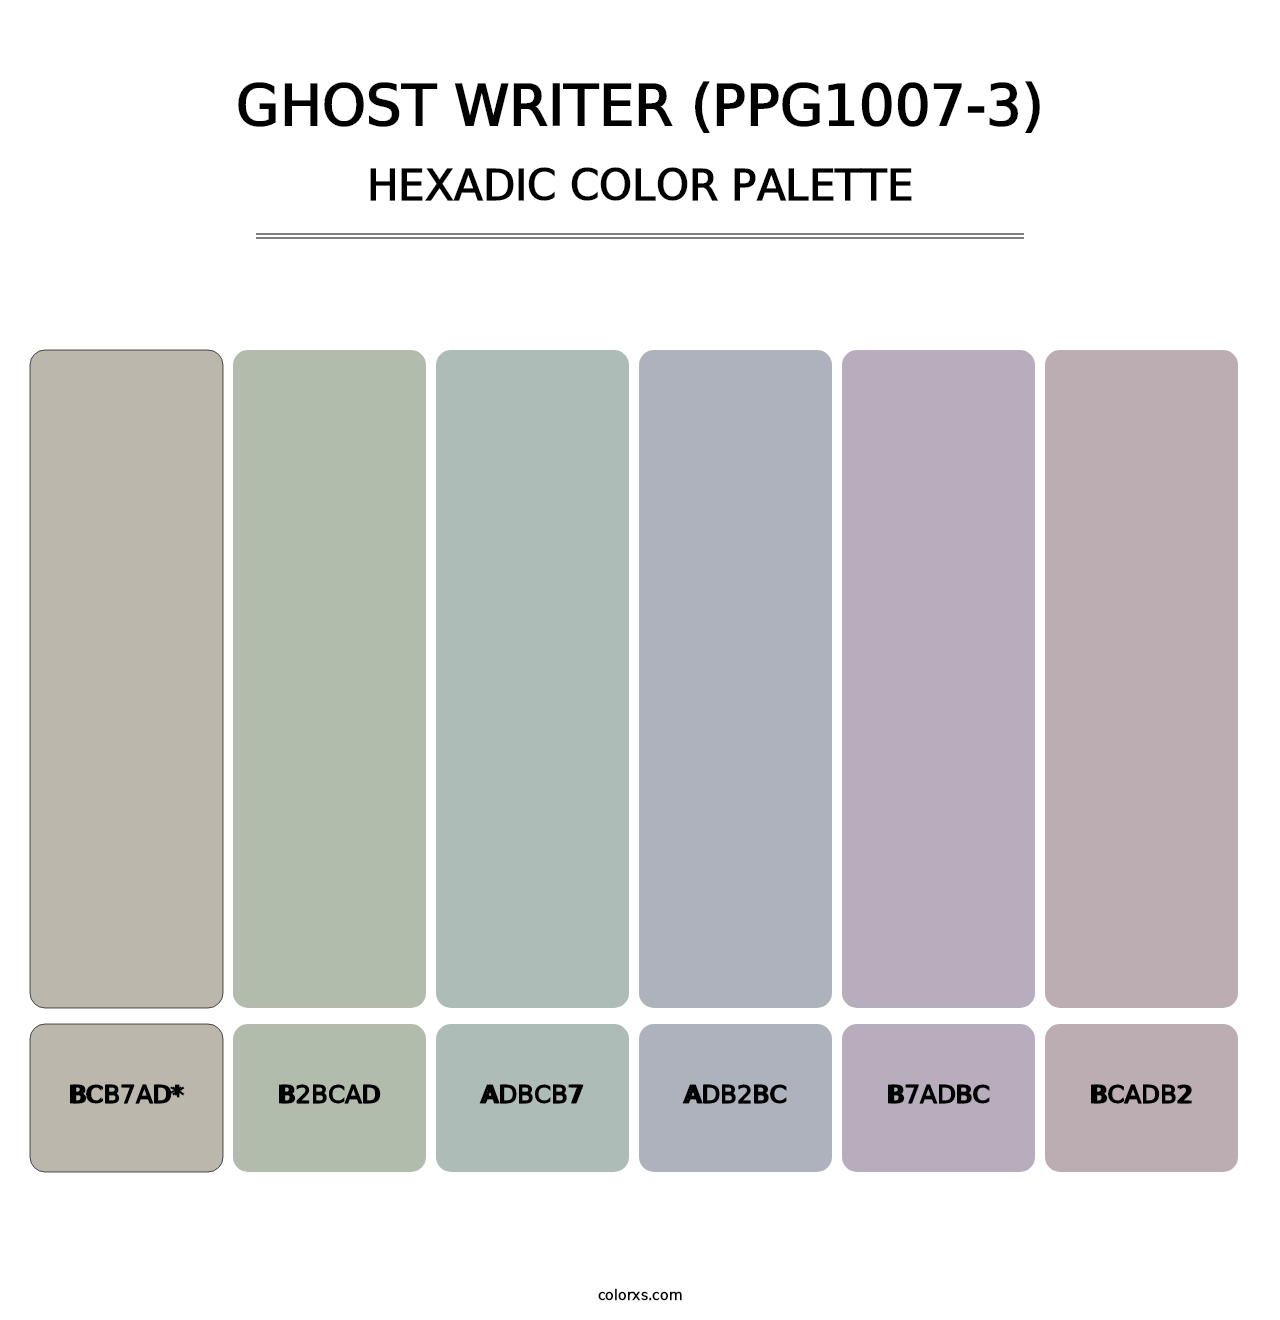 Ghost Writer (PPG1007-3) - Hexadic Color Palette